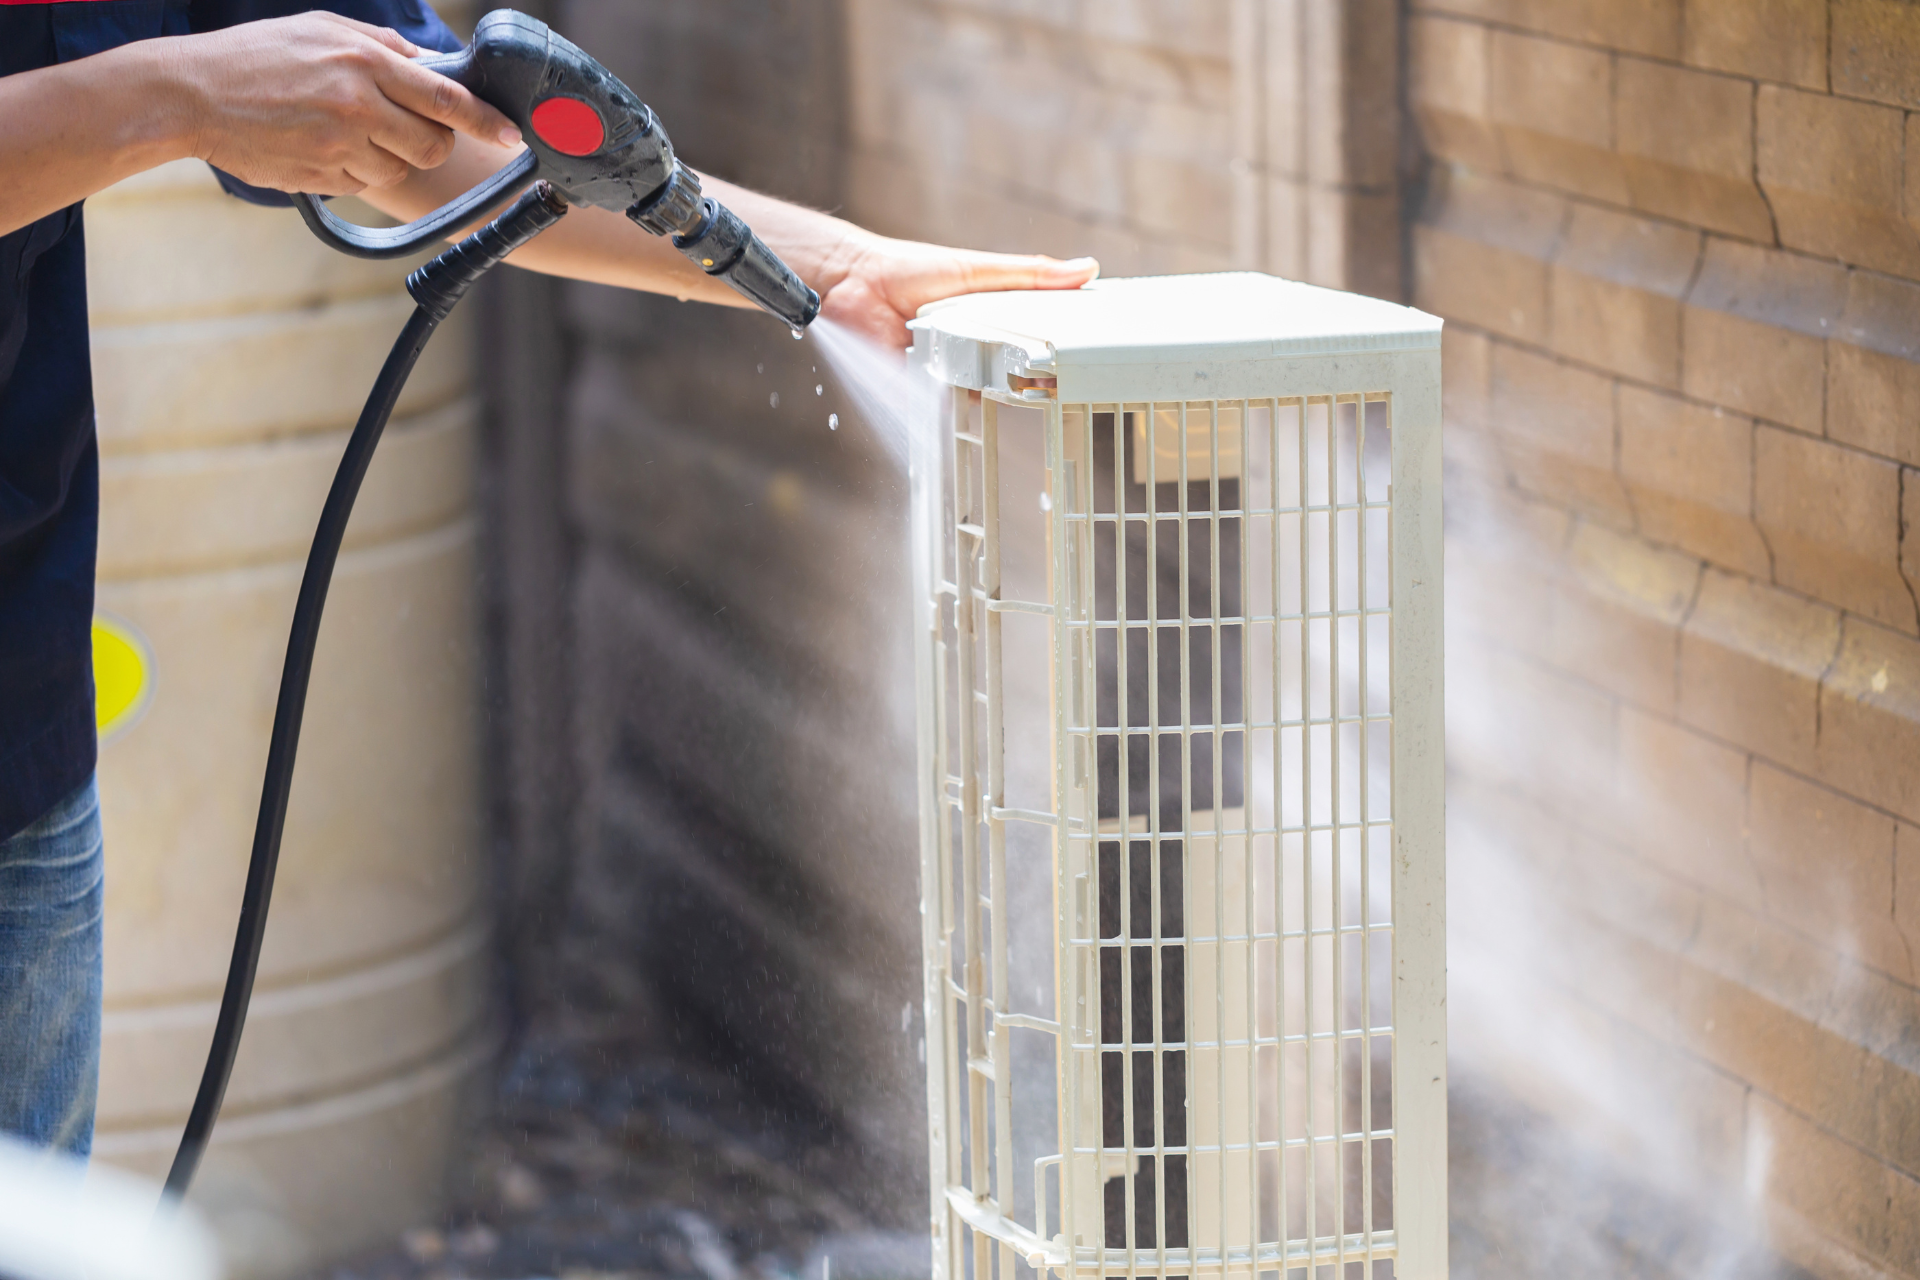 a person is cleaning an air conditioner with a high pressure washer .